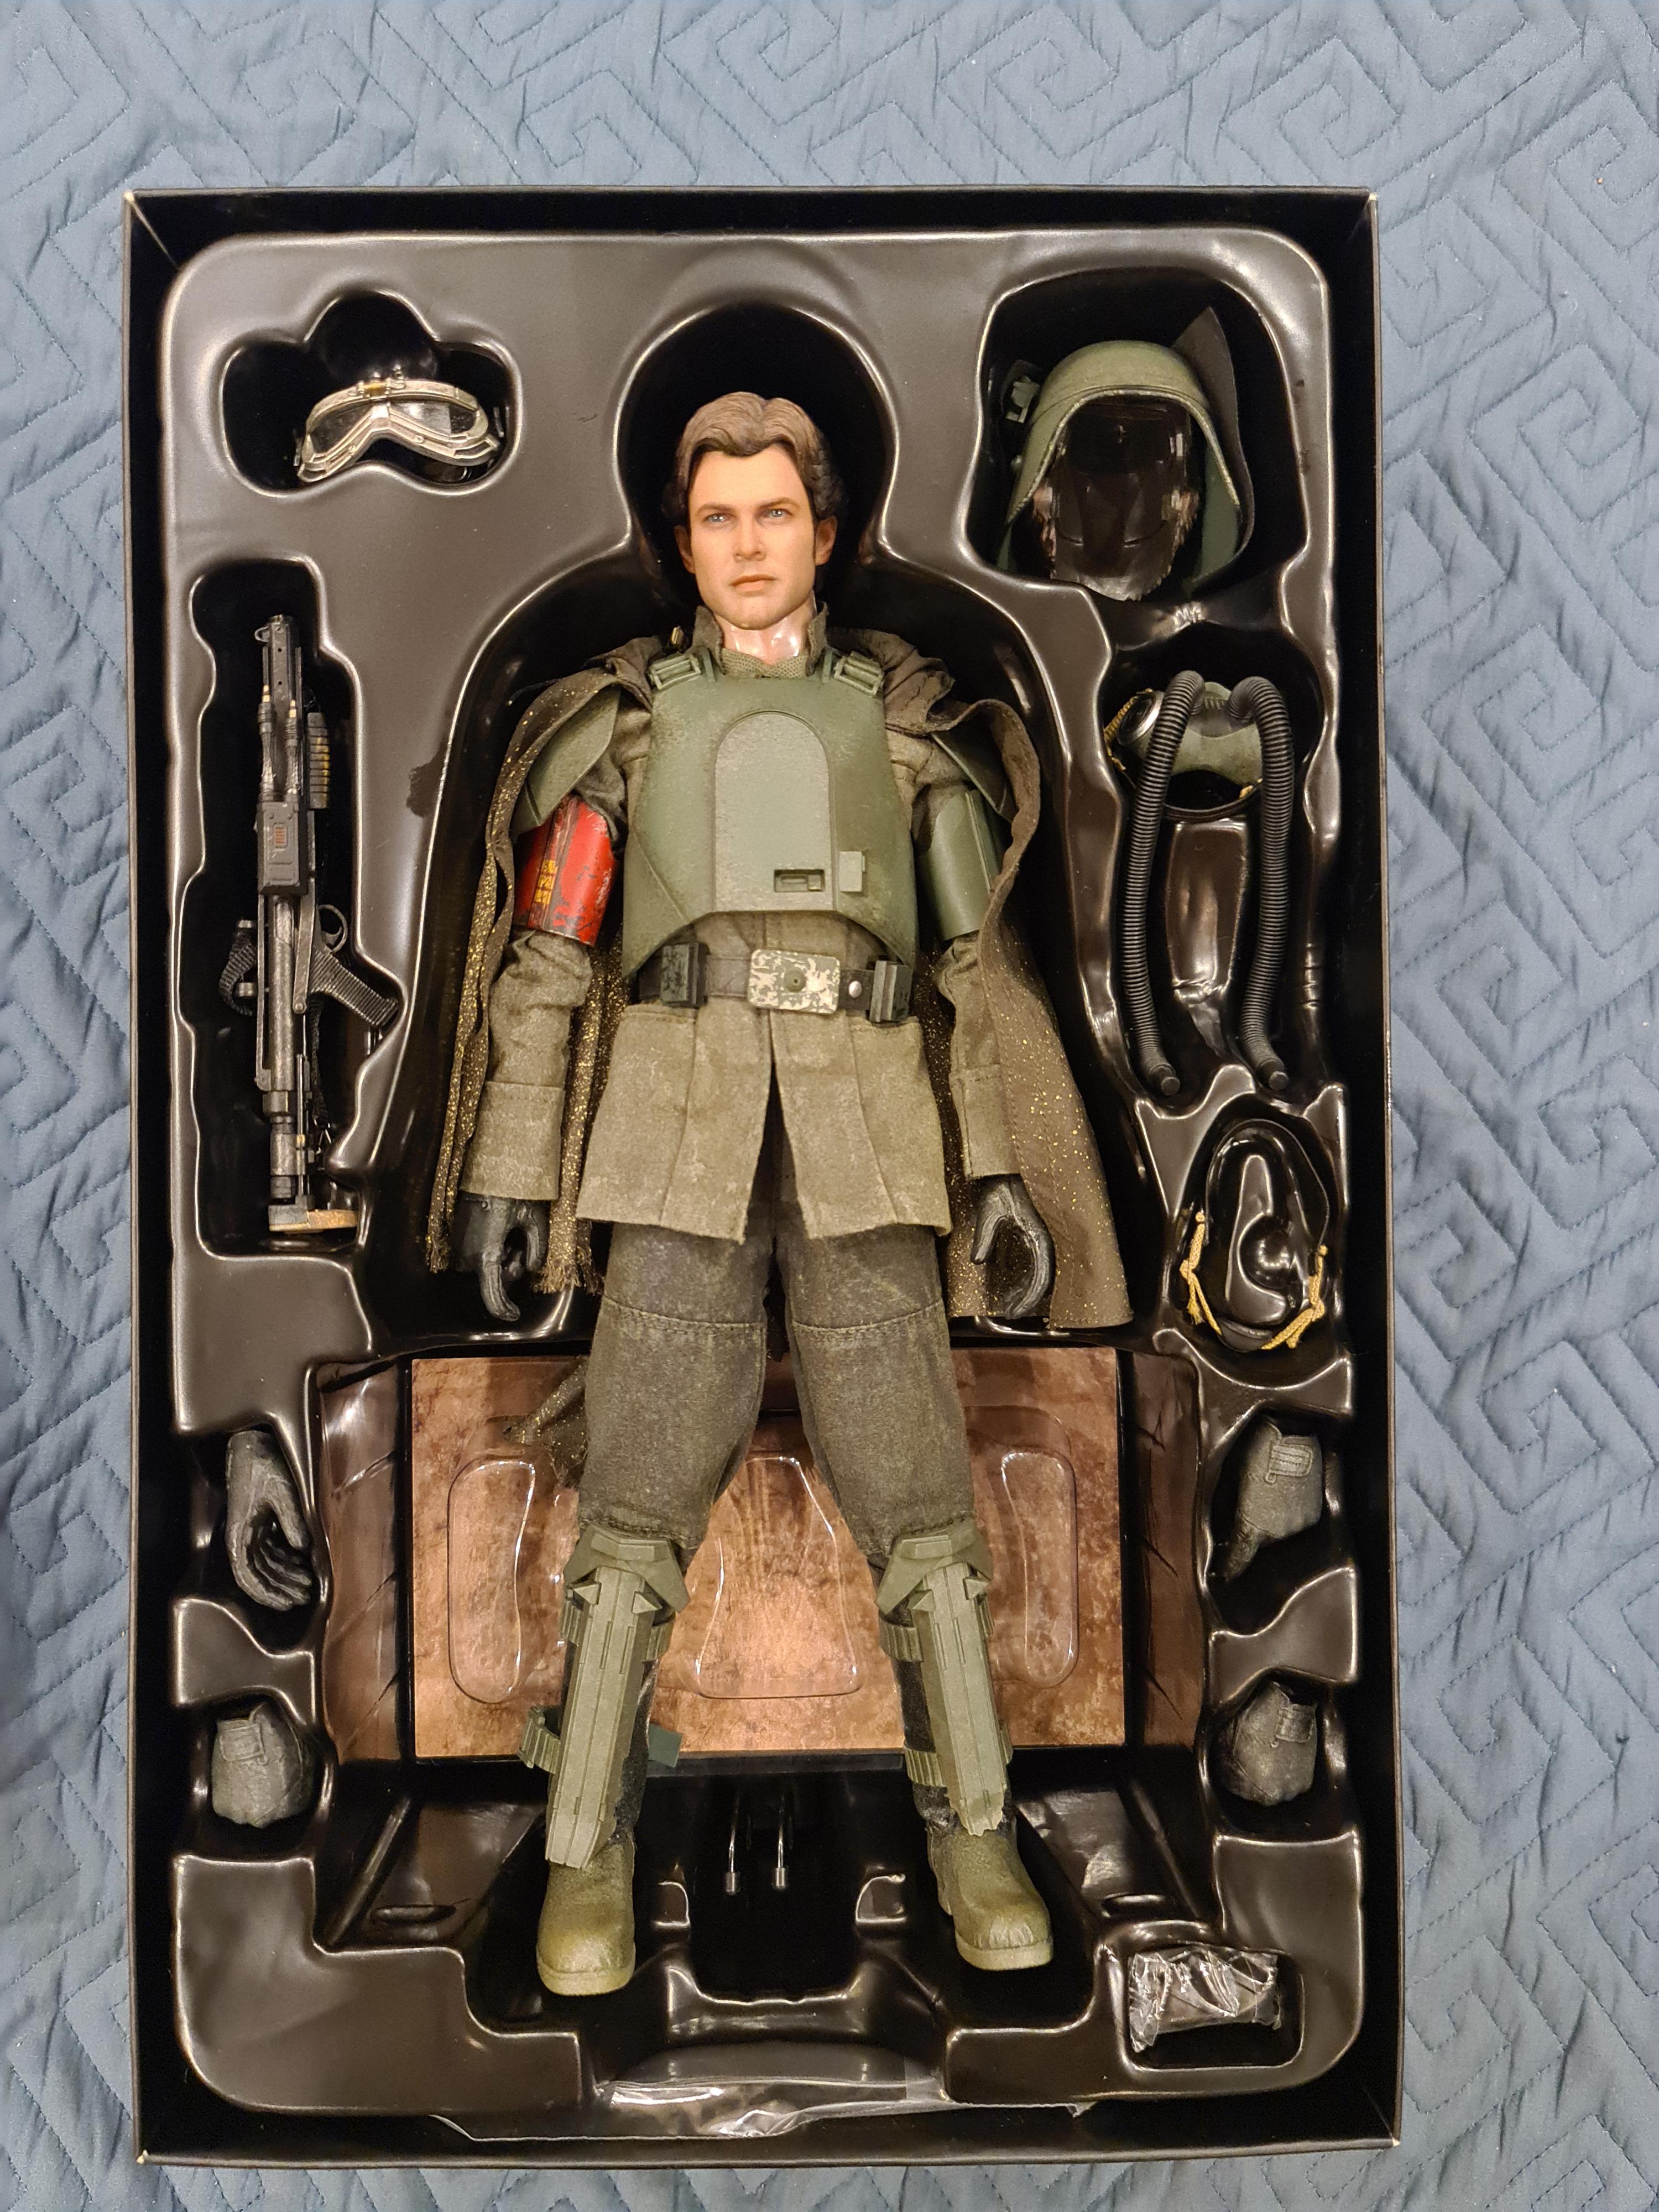 Hot Toys - Han Solo Mudtrooper - 1:6 Scale Collectible - Solo: A Star Wars Story - Movie Masterpiece Series